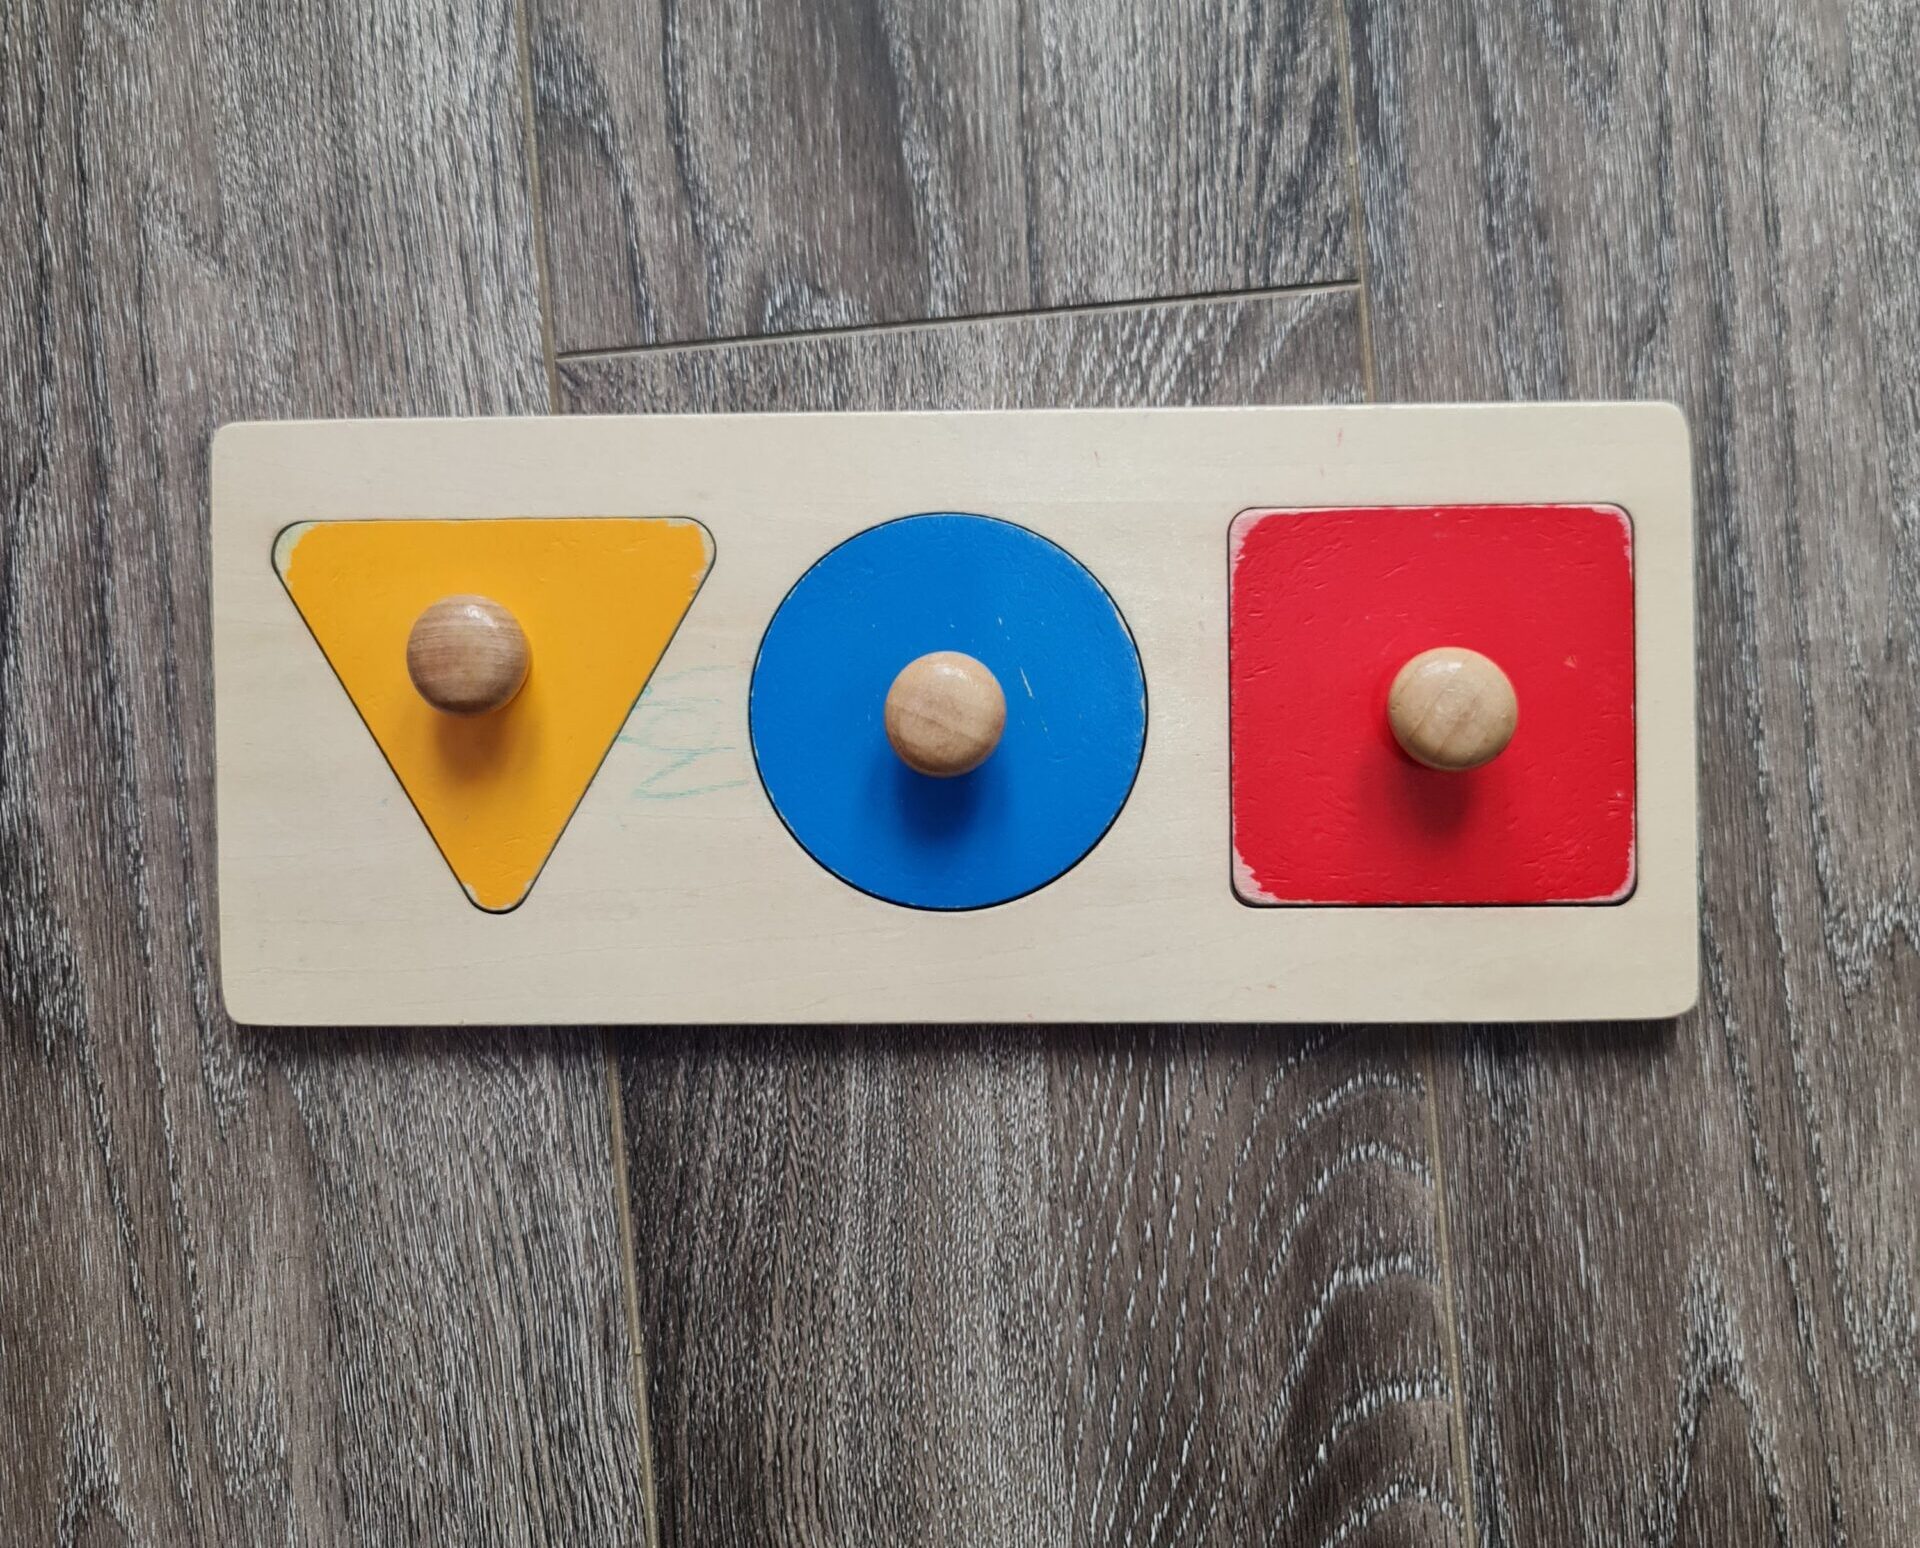 Best Montessori toys for toddlers